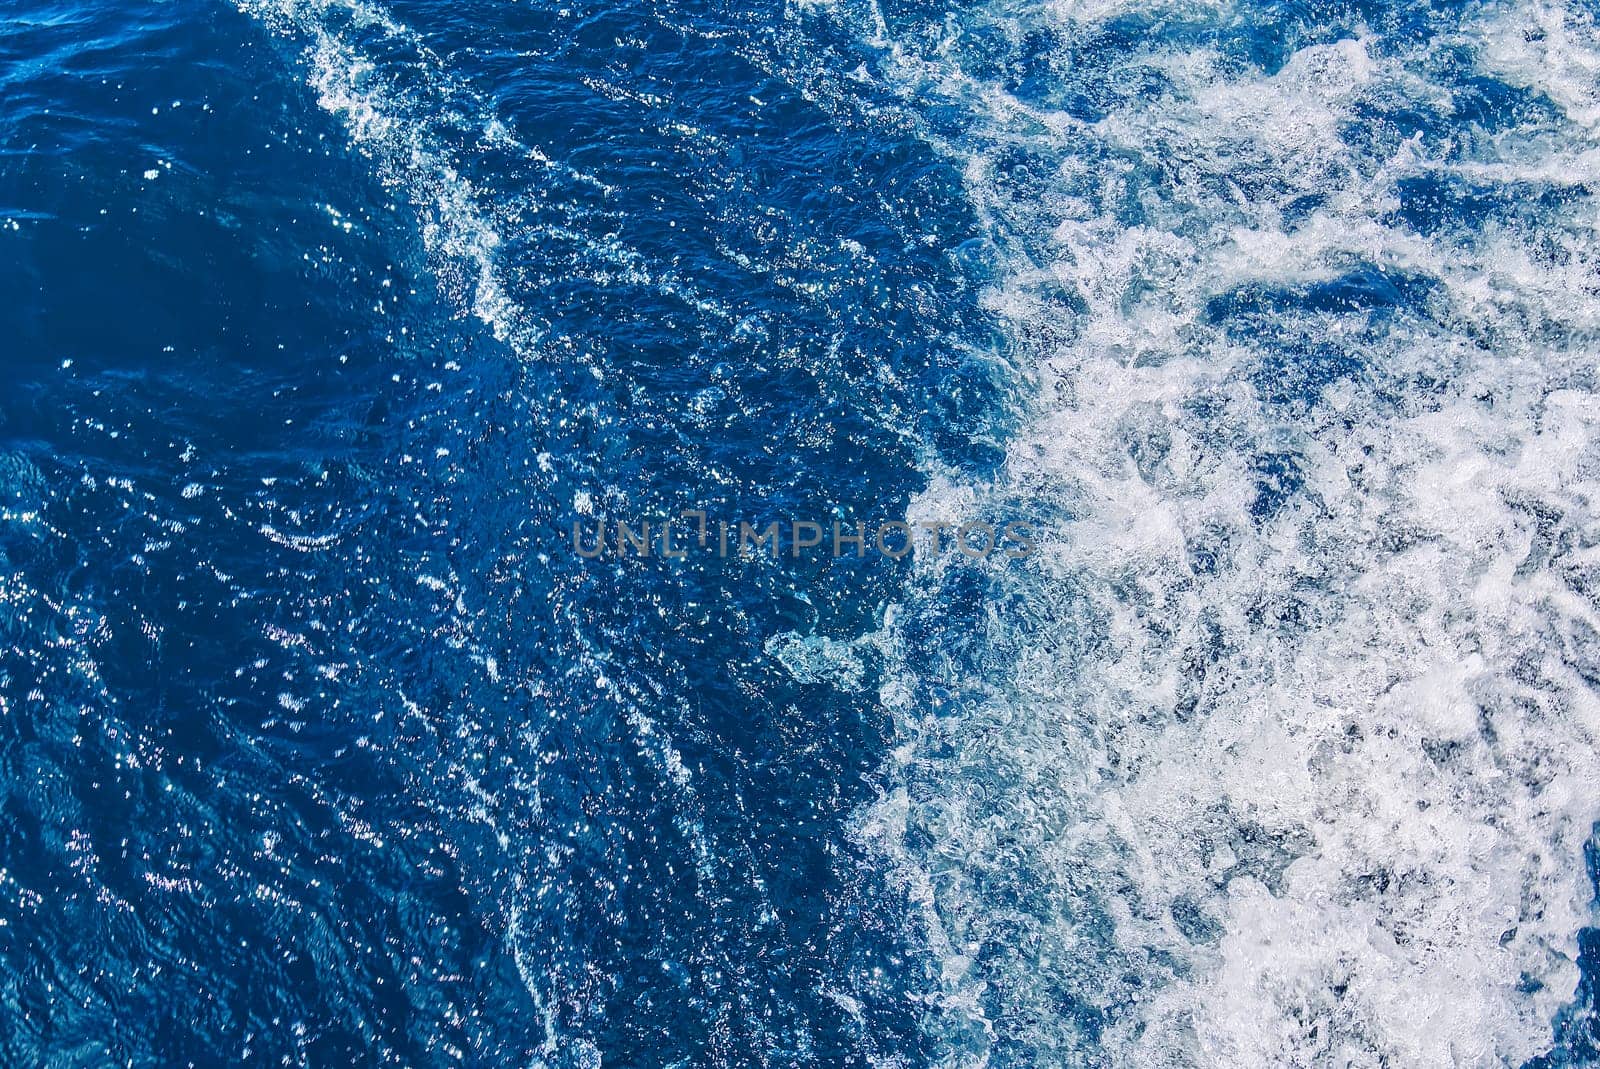 Abstract blue sea water with white waves. Blue sea texture with waves and foam. Rough deep turquoise and blue Mediterranean sea. Sea water top view.